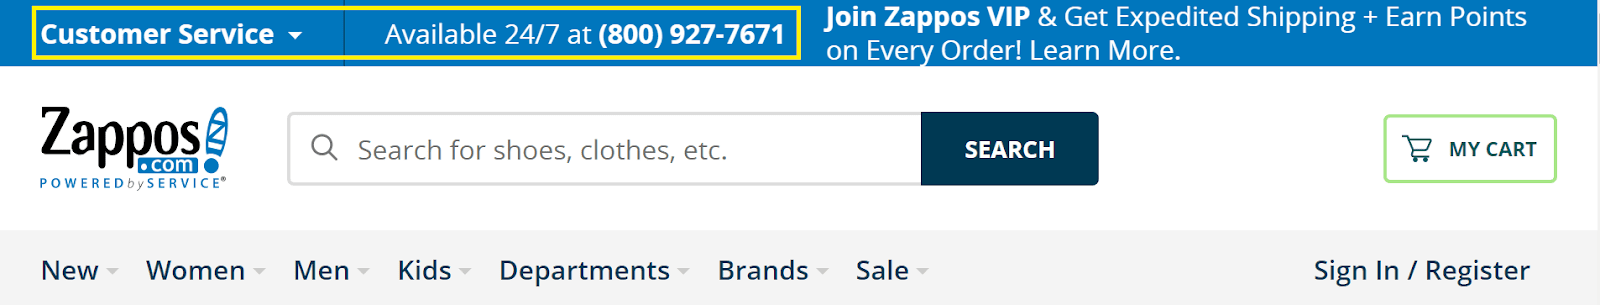 An image of the Zappos homepage, where a 24/7 customer help line is available at the top of the page.